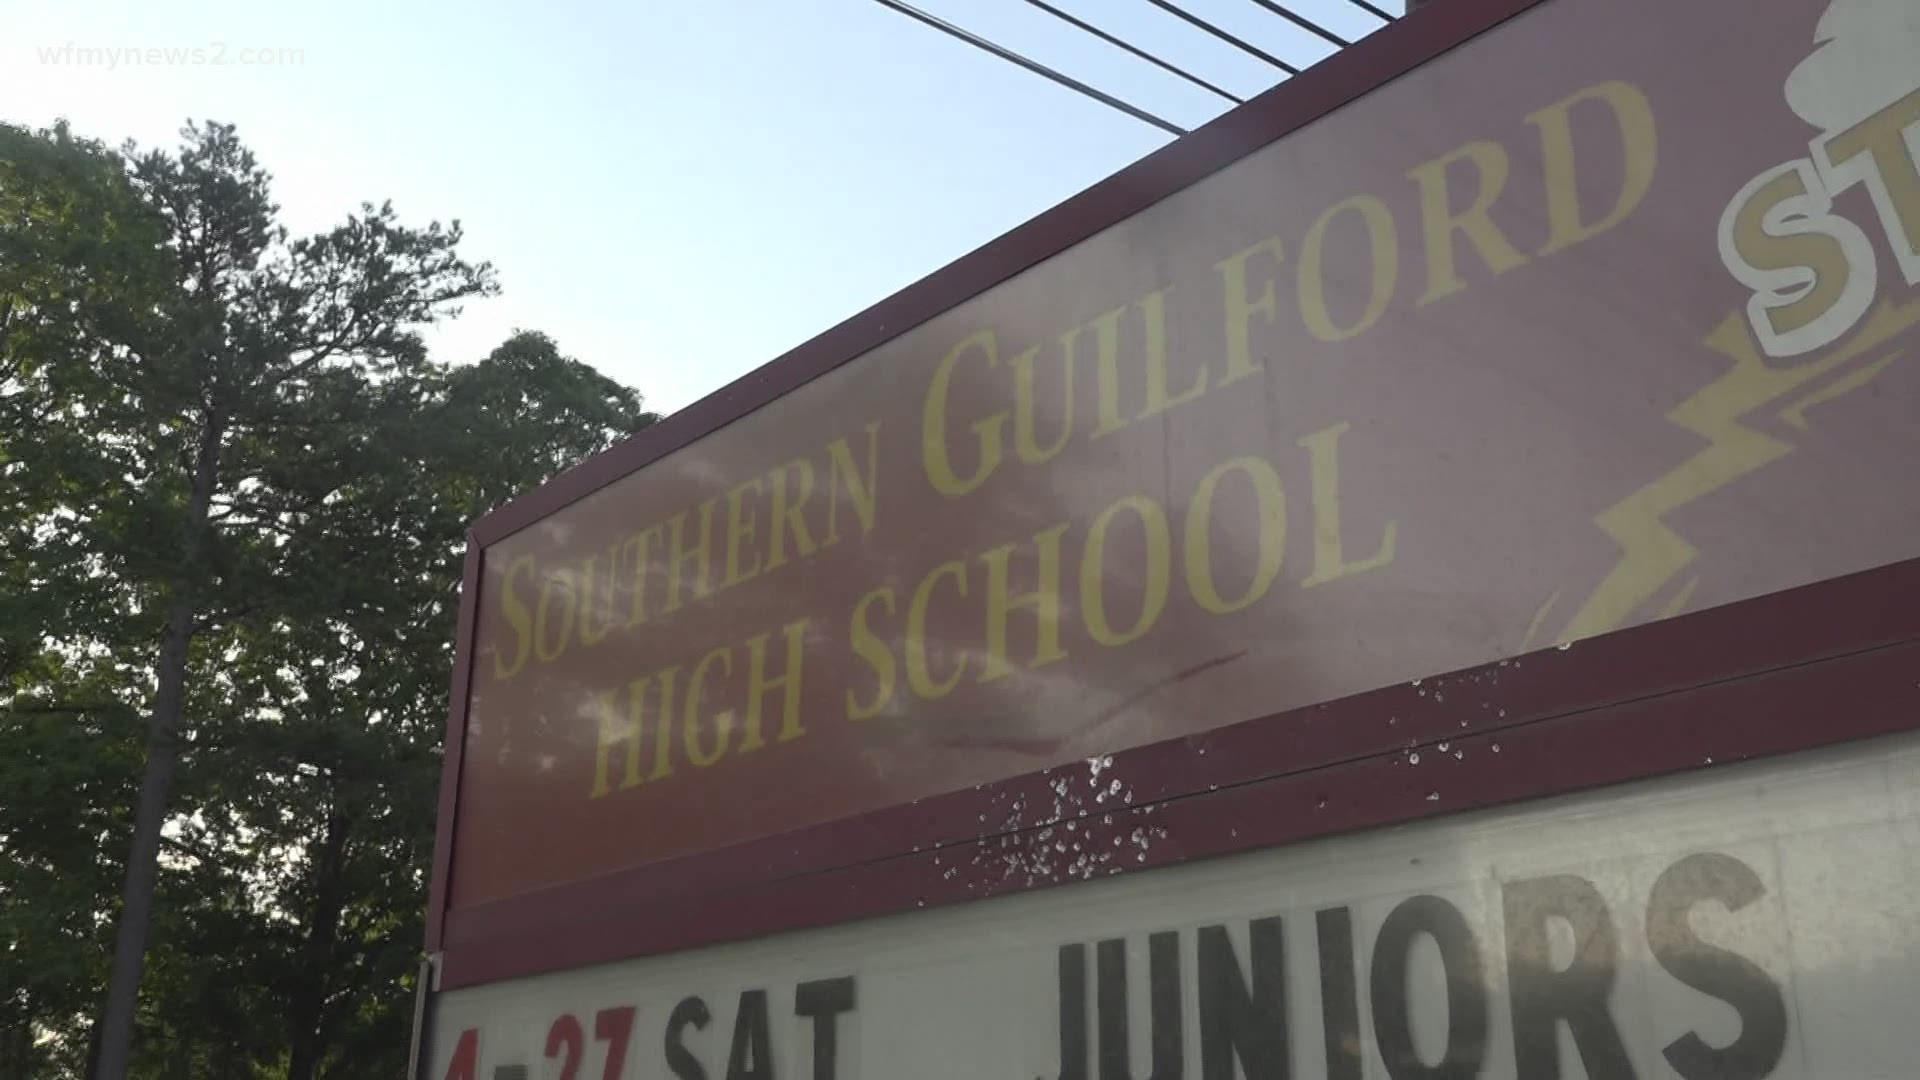 The Guilford County Sheriff's Office said this was a planned, targeted attack against the student.